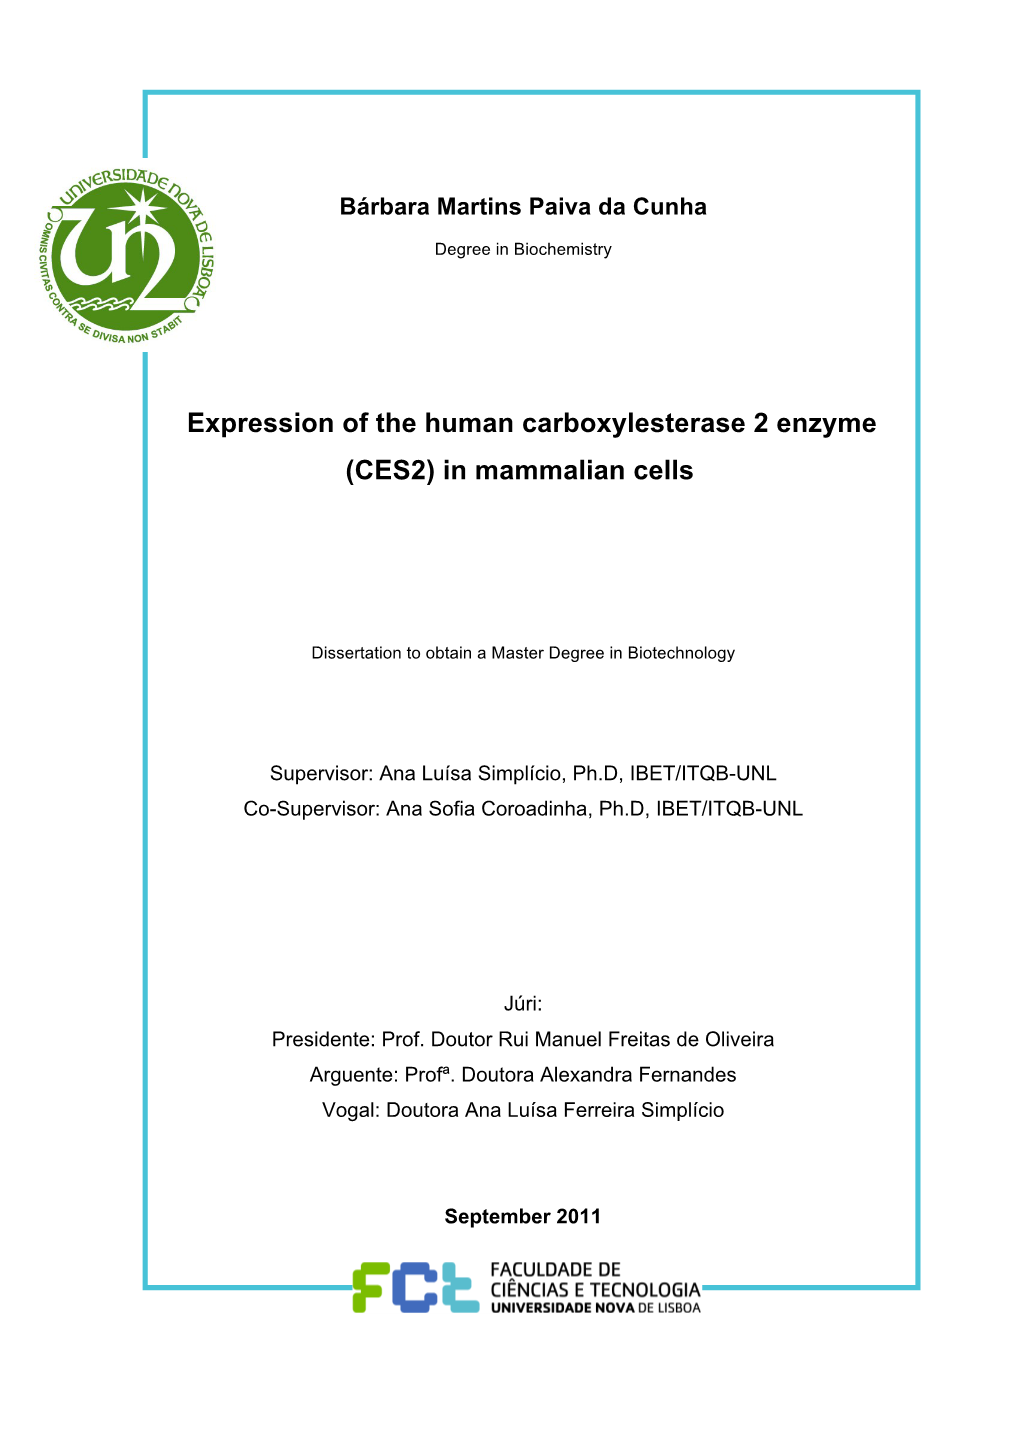 Expression of the Human Carboxylesterase 2 Enzyme (CES2) in Mammalian Cells